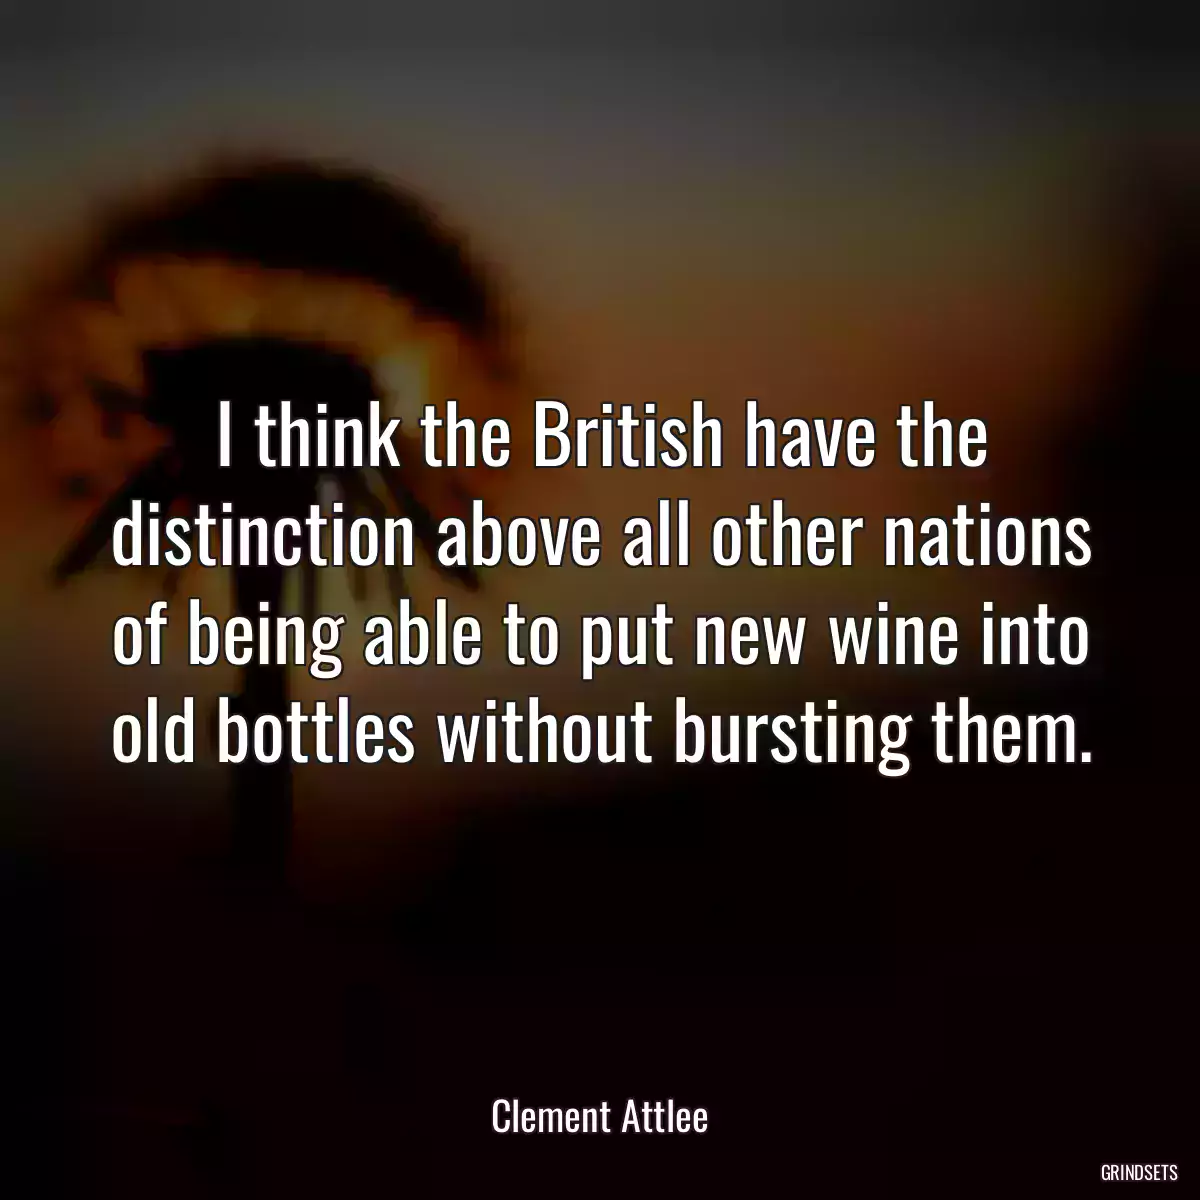 I think the British have the distinction above all other nations of being able to put new wine into old bottles without bursting them.